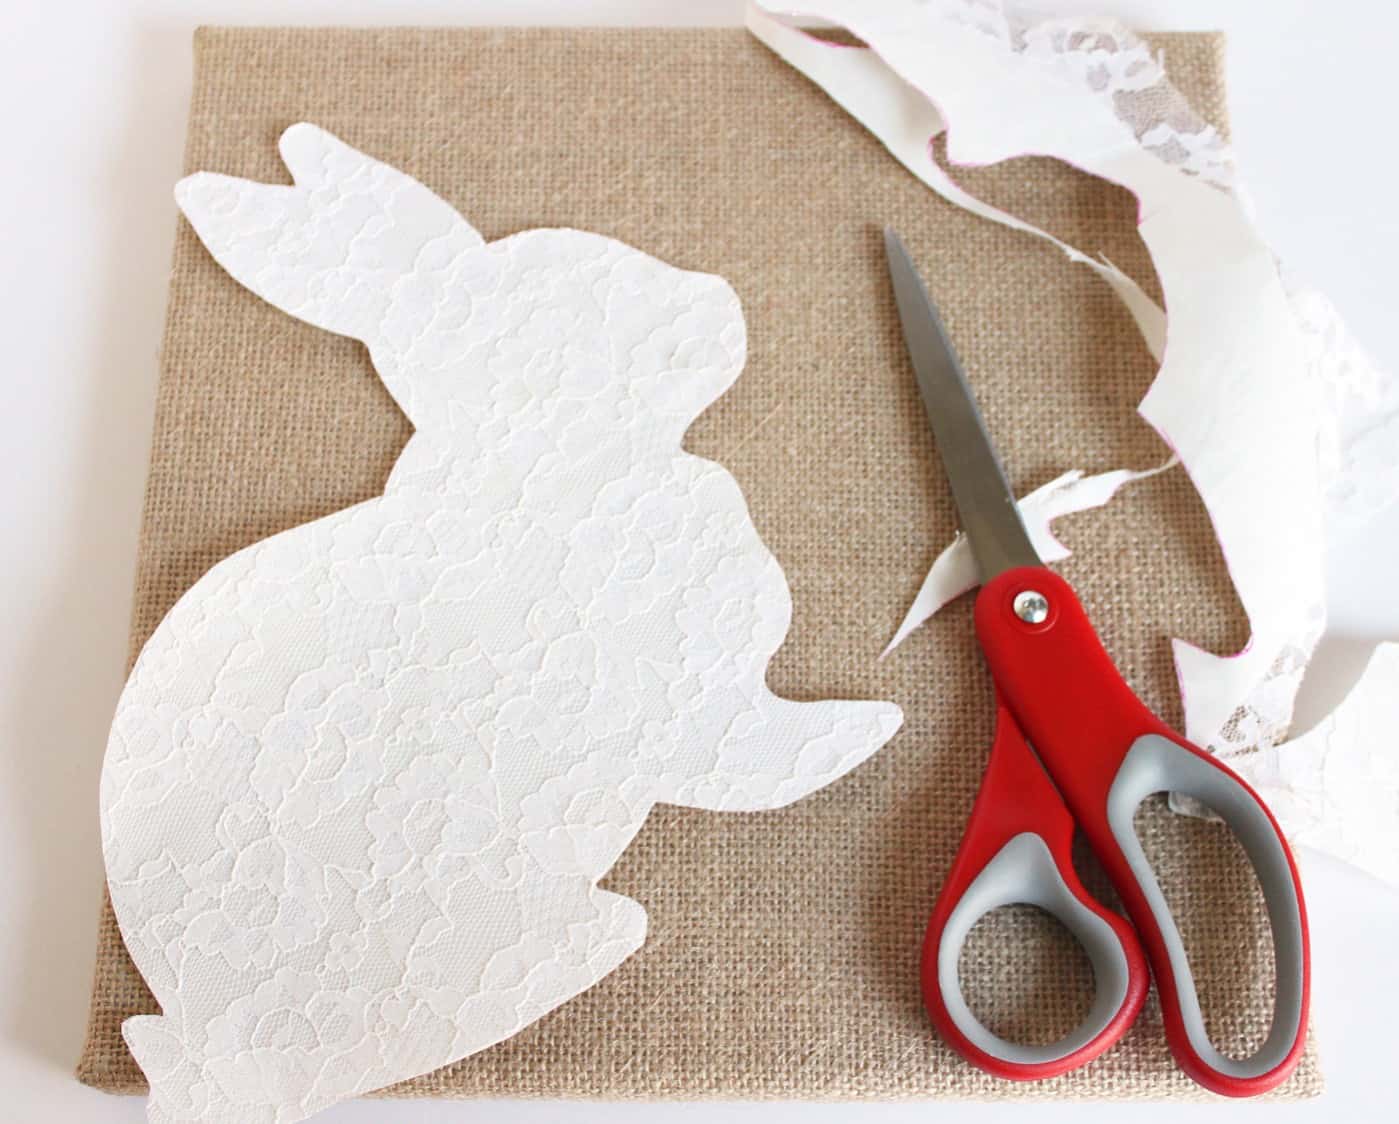 Lace rabbit shape cut out sitting on top of the burlap fabric with scissors